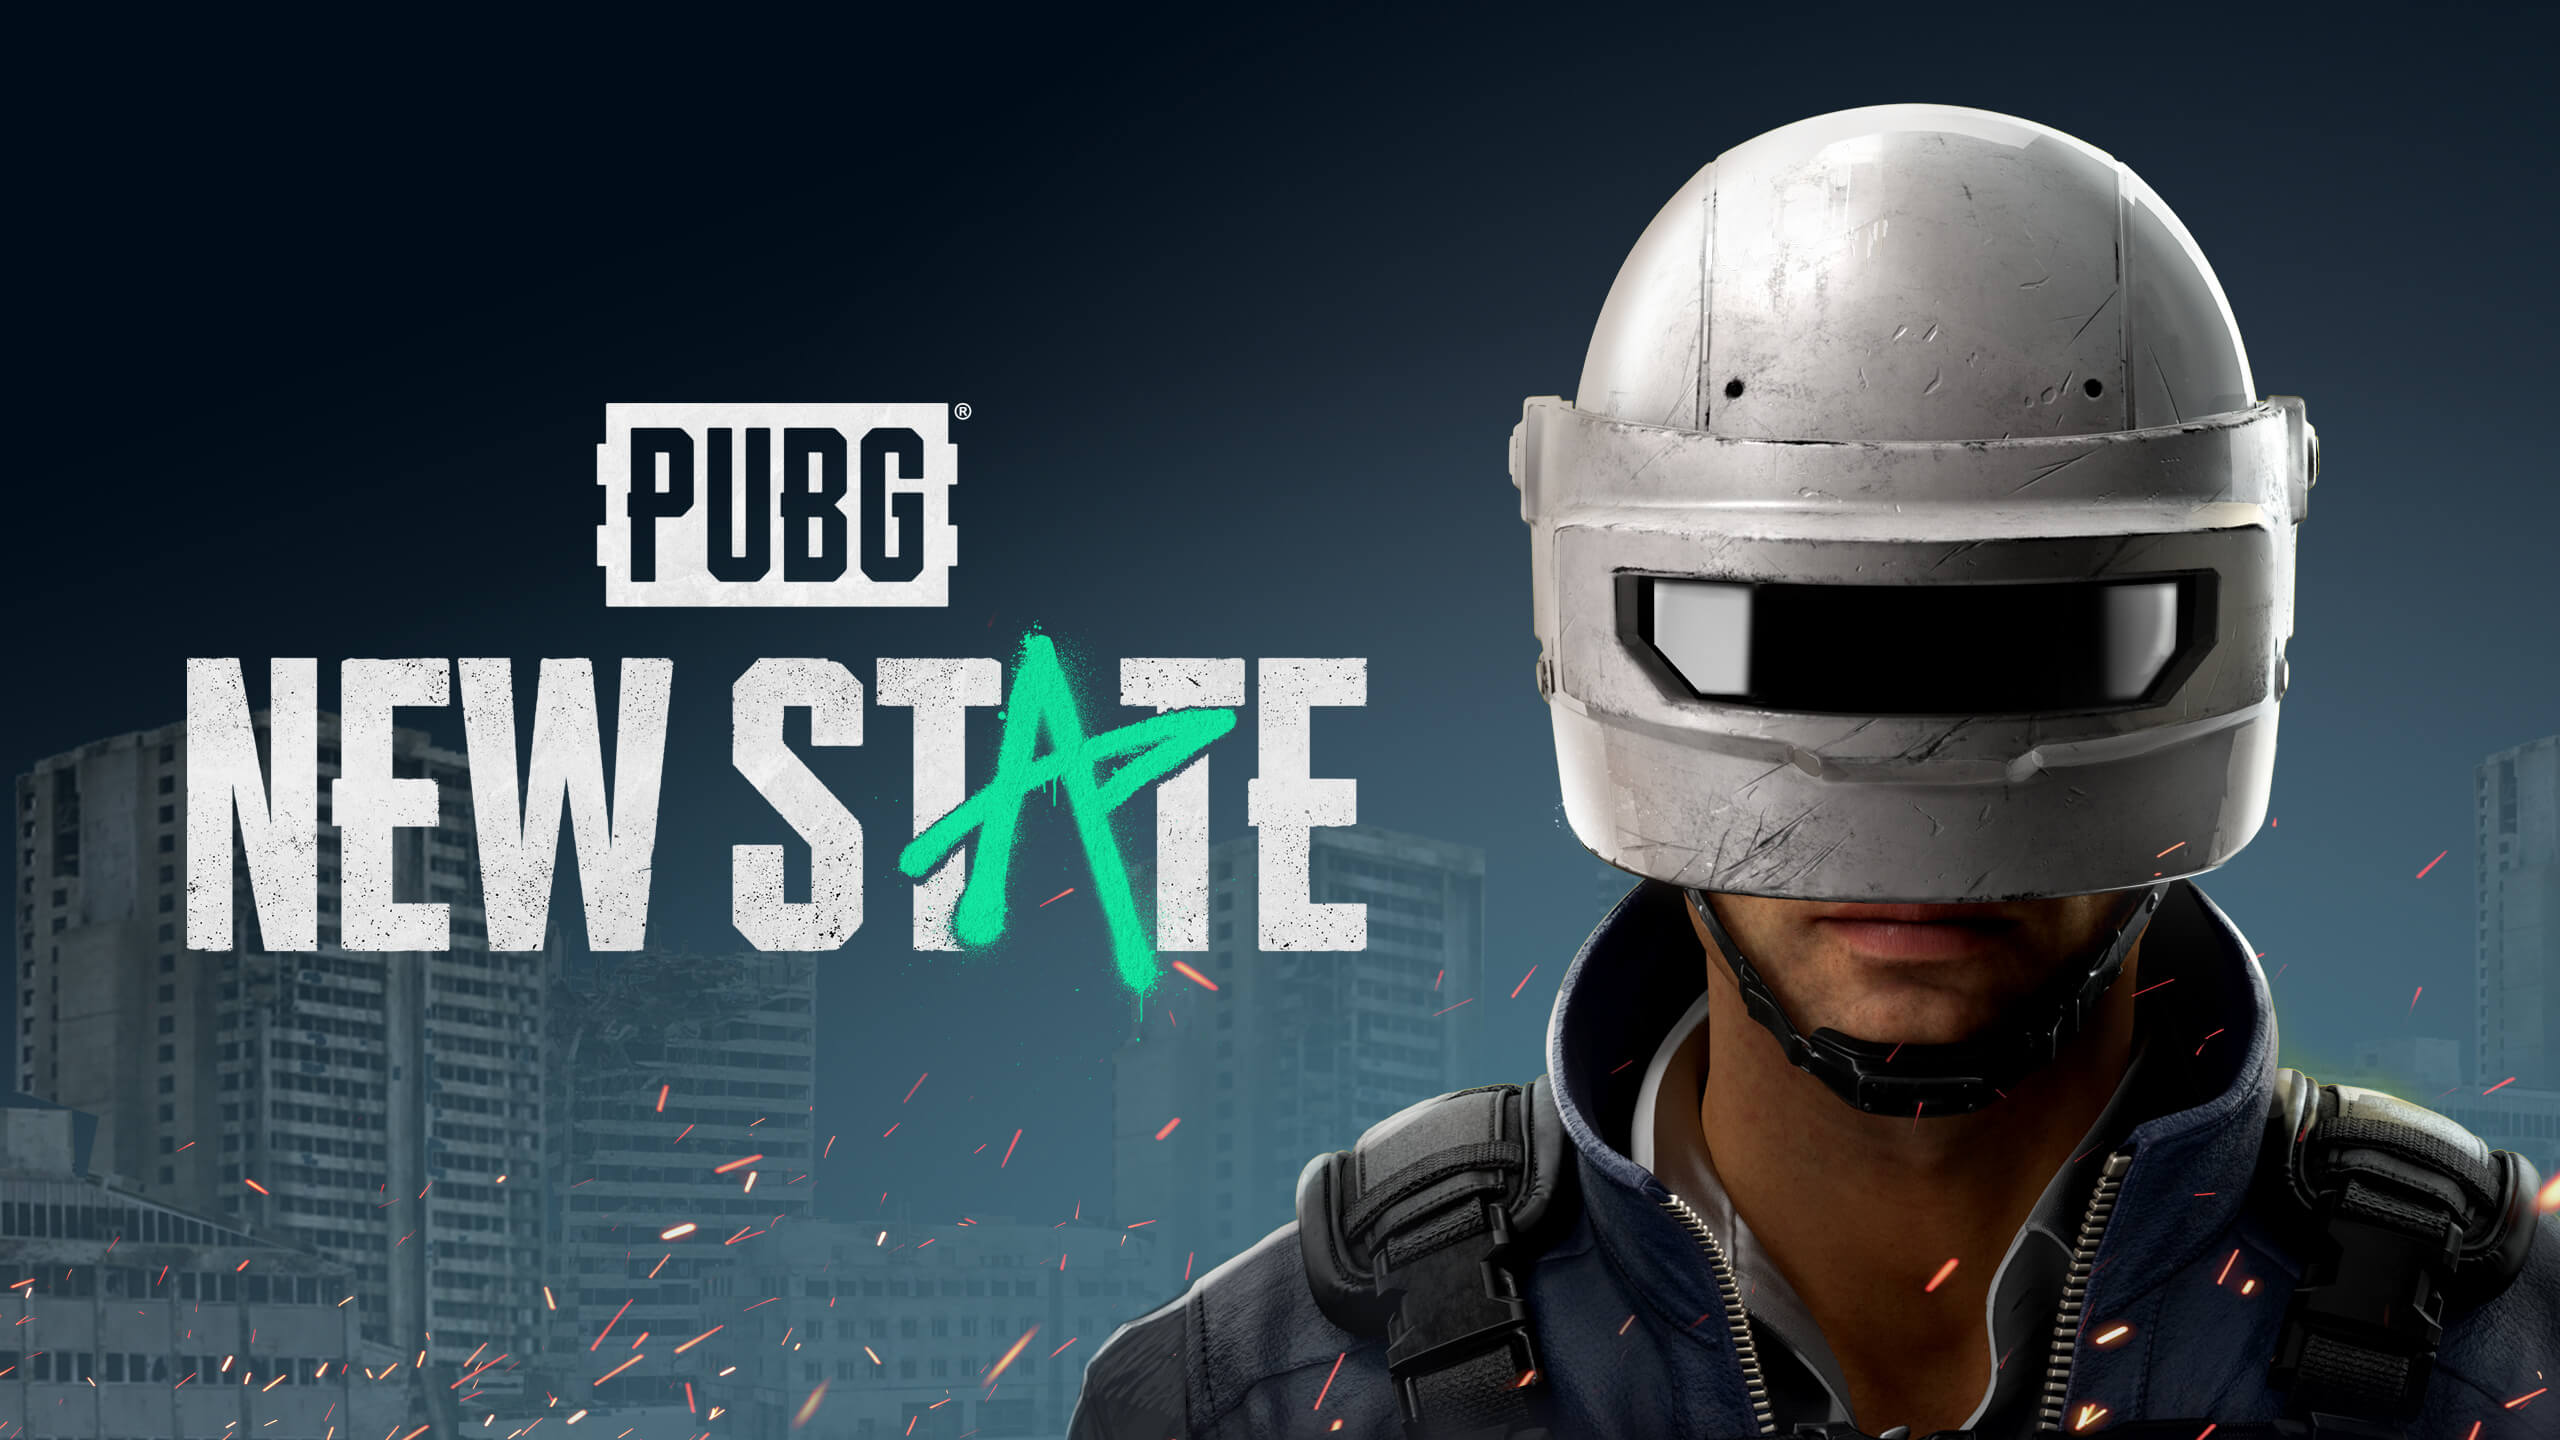 Image for PUBG: New State is the futuristic sequel to PUBG Mobile, and it's coming this year